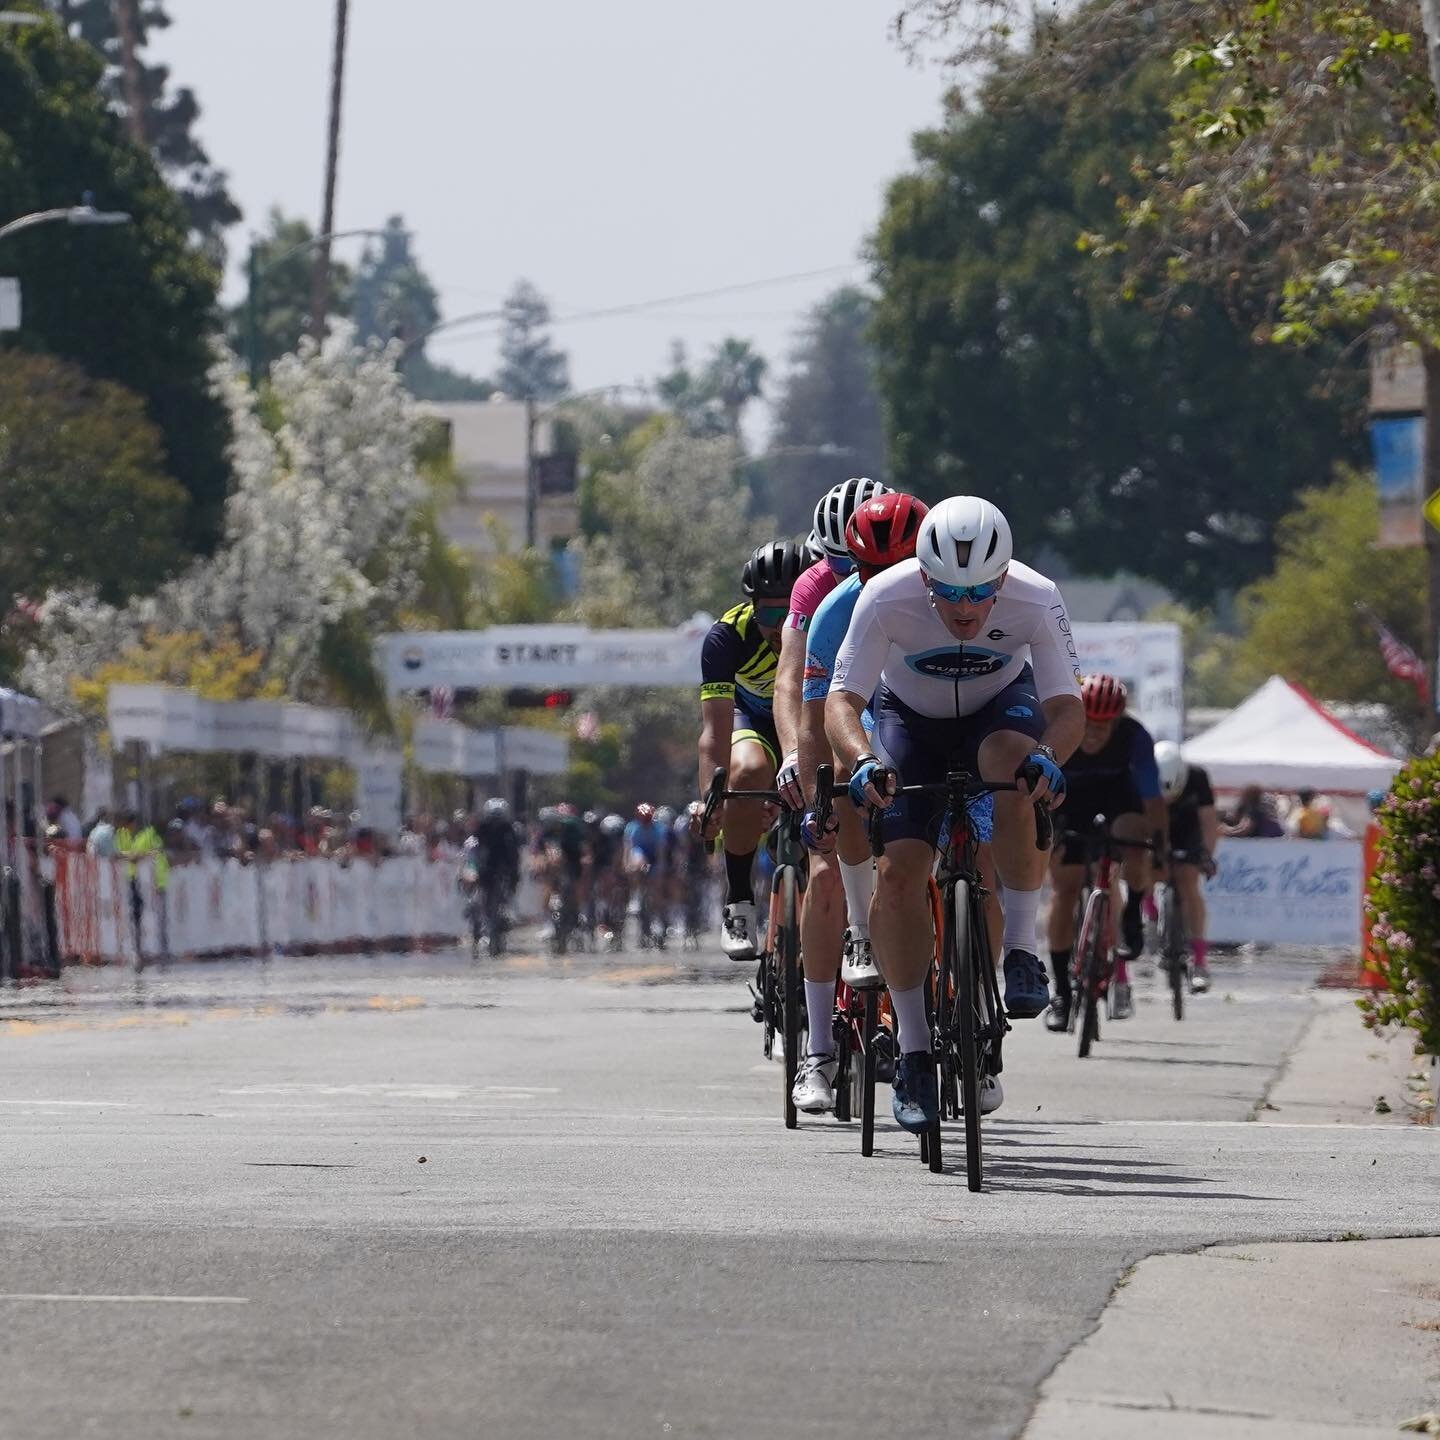 Hammering on the front is a thankless job but we got guys who can do that all day 🤙 It didn&rsquo;t work out in our favor last weekend @redlandsclassic but we&rsquo;ll be back and in greater numbers 😁

The spirit of crit racing is alive!

📸: @thec